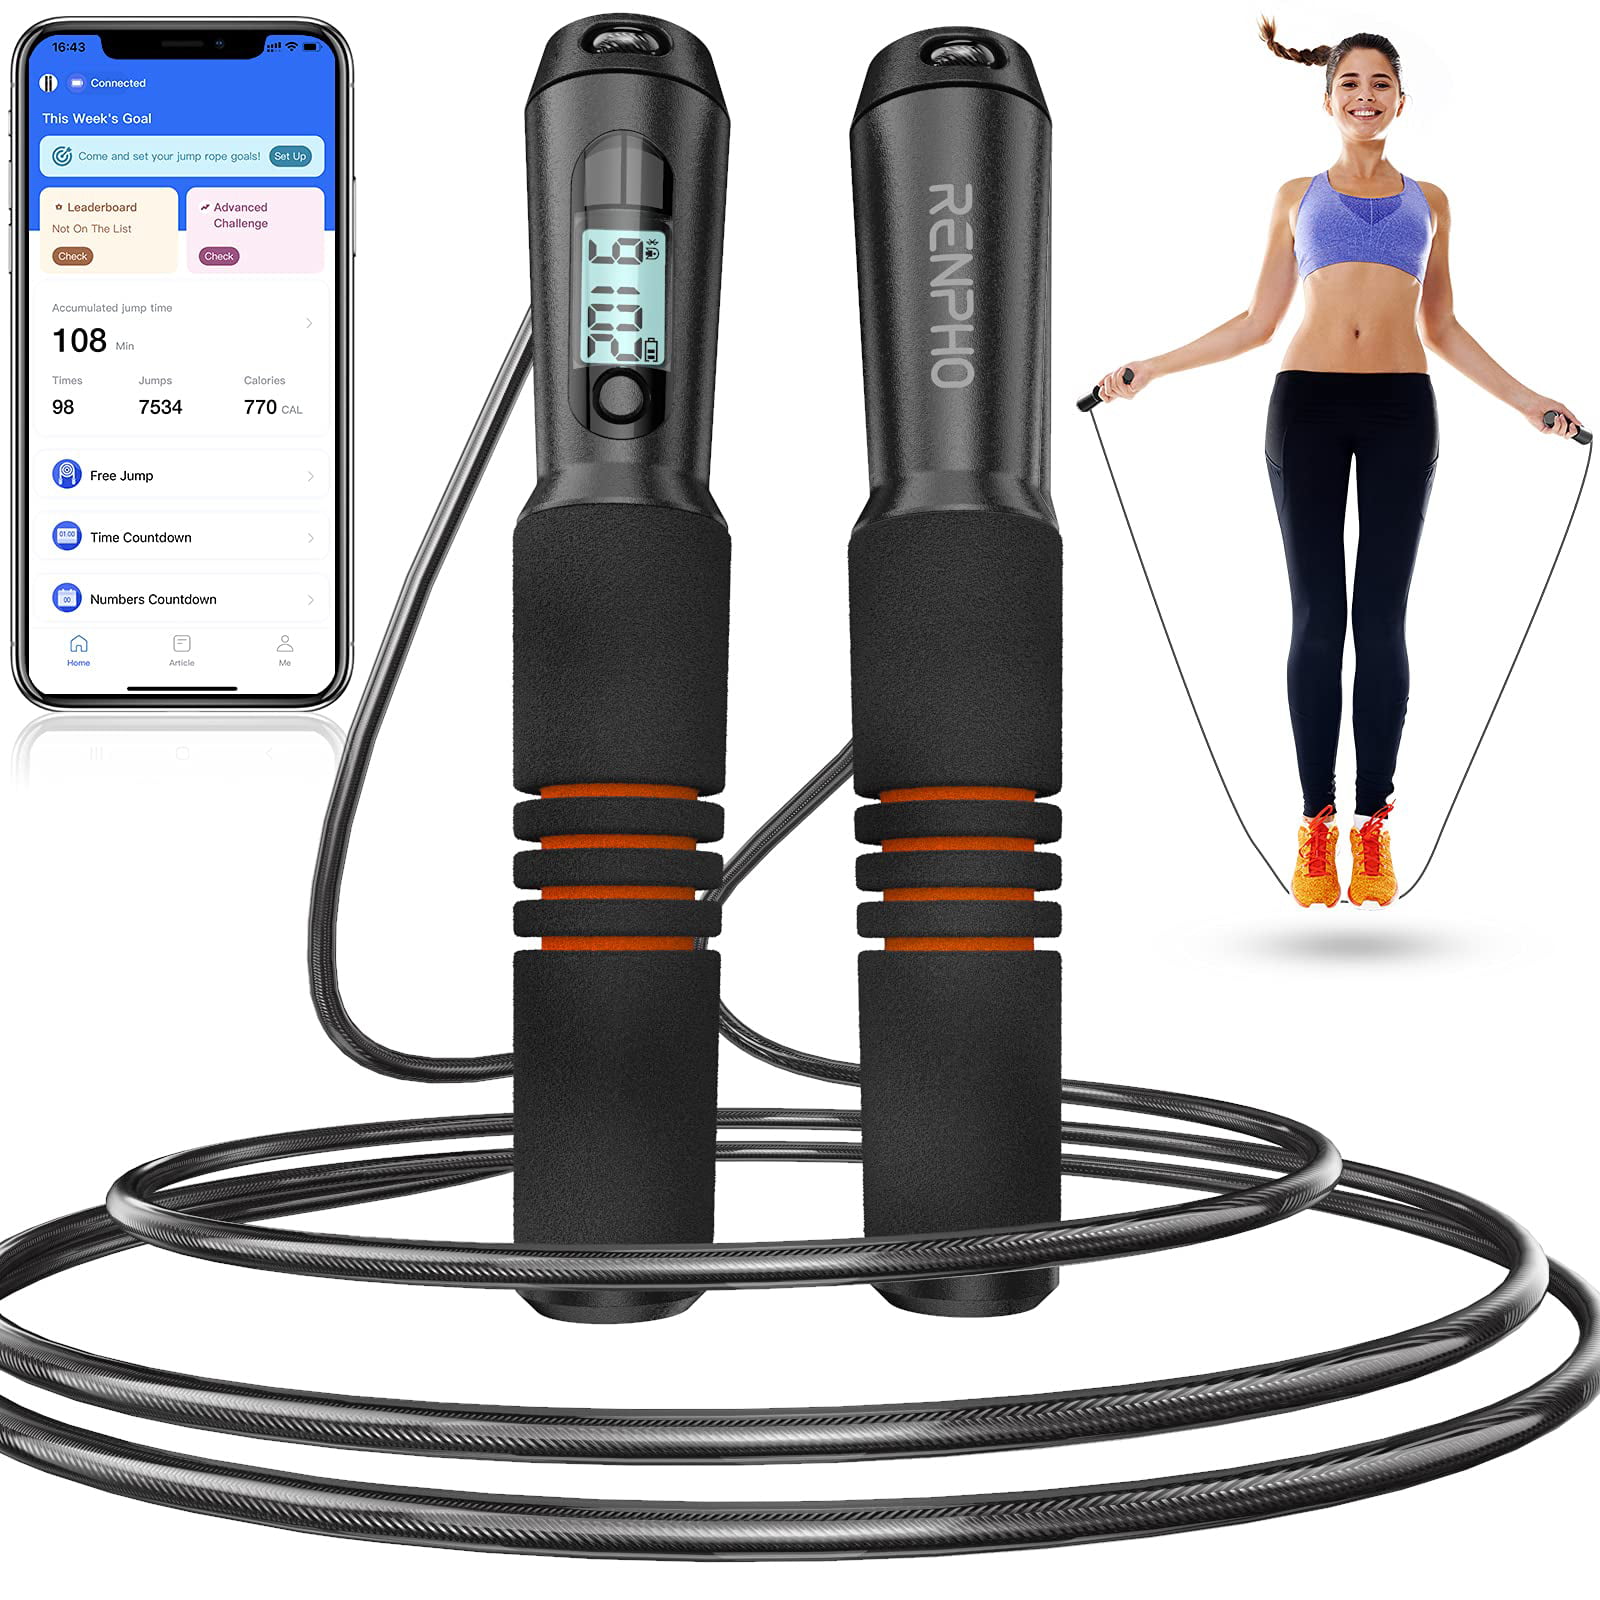 UK Adjustable Skipping Rope Boxing Fitness Jump Rope Adult Kids Workout Free P&P 